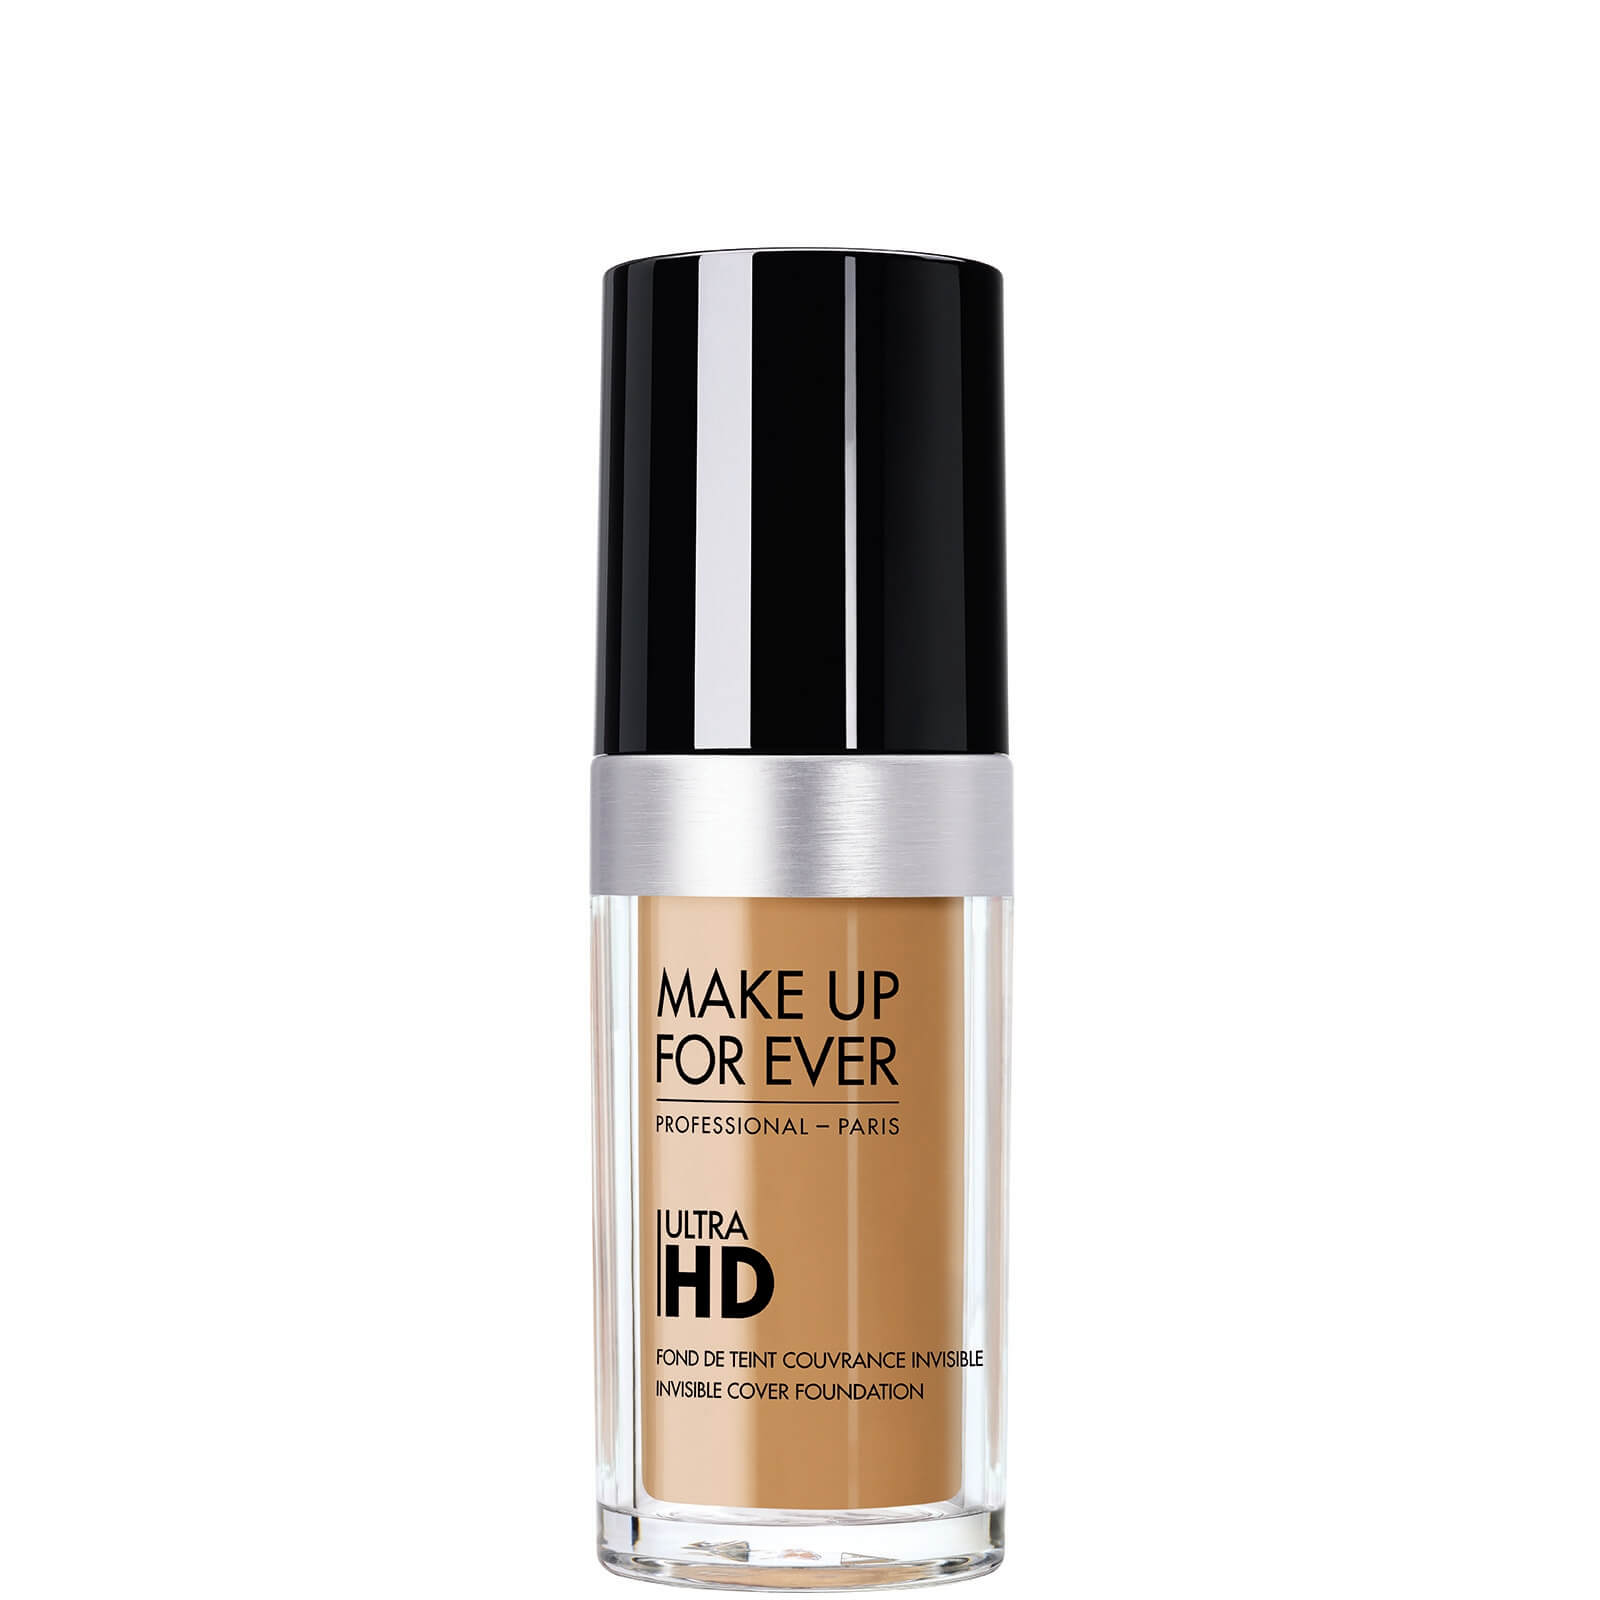 MAKE UP FOR EVER ultra Hd Invisible Cover Foundation 30ml (Various Shades) - - Y415 Almond